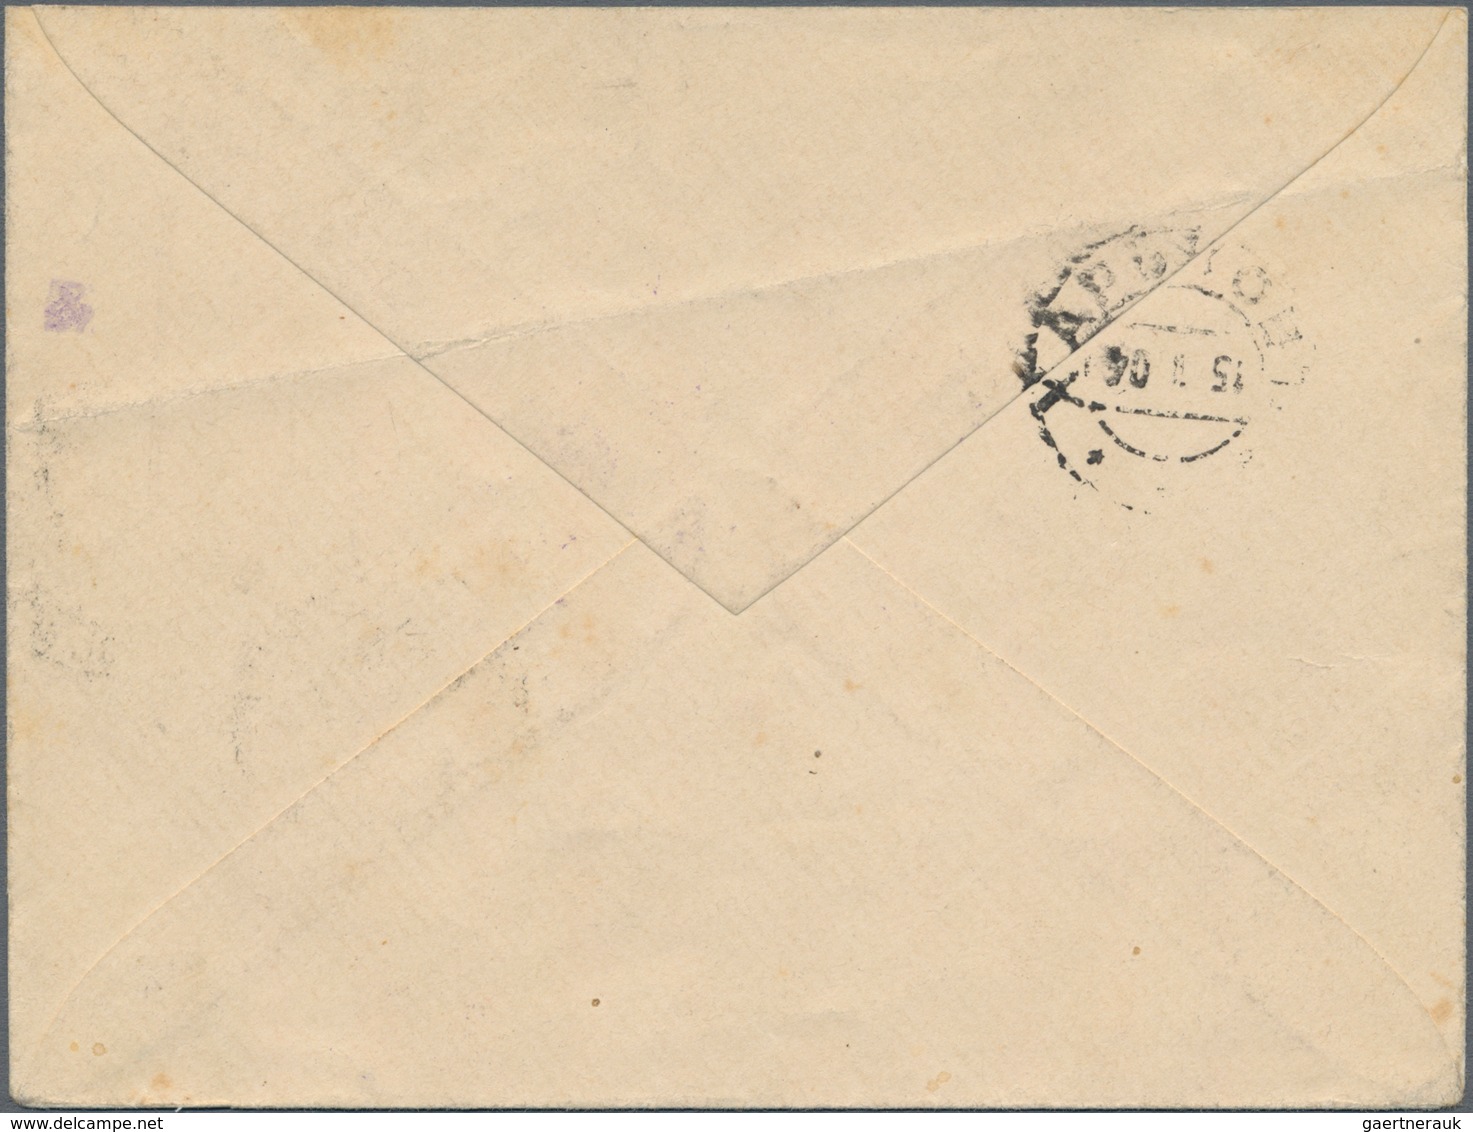 Russische Post In China: 23.09.1904 Russo-Japanese War Soldiers Letter From FIELD POST OFFICE 5th SI - China